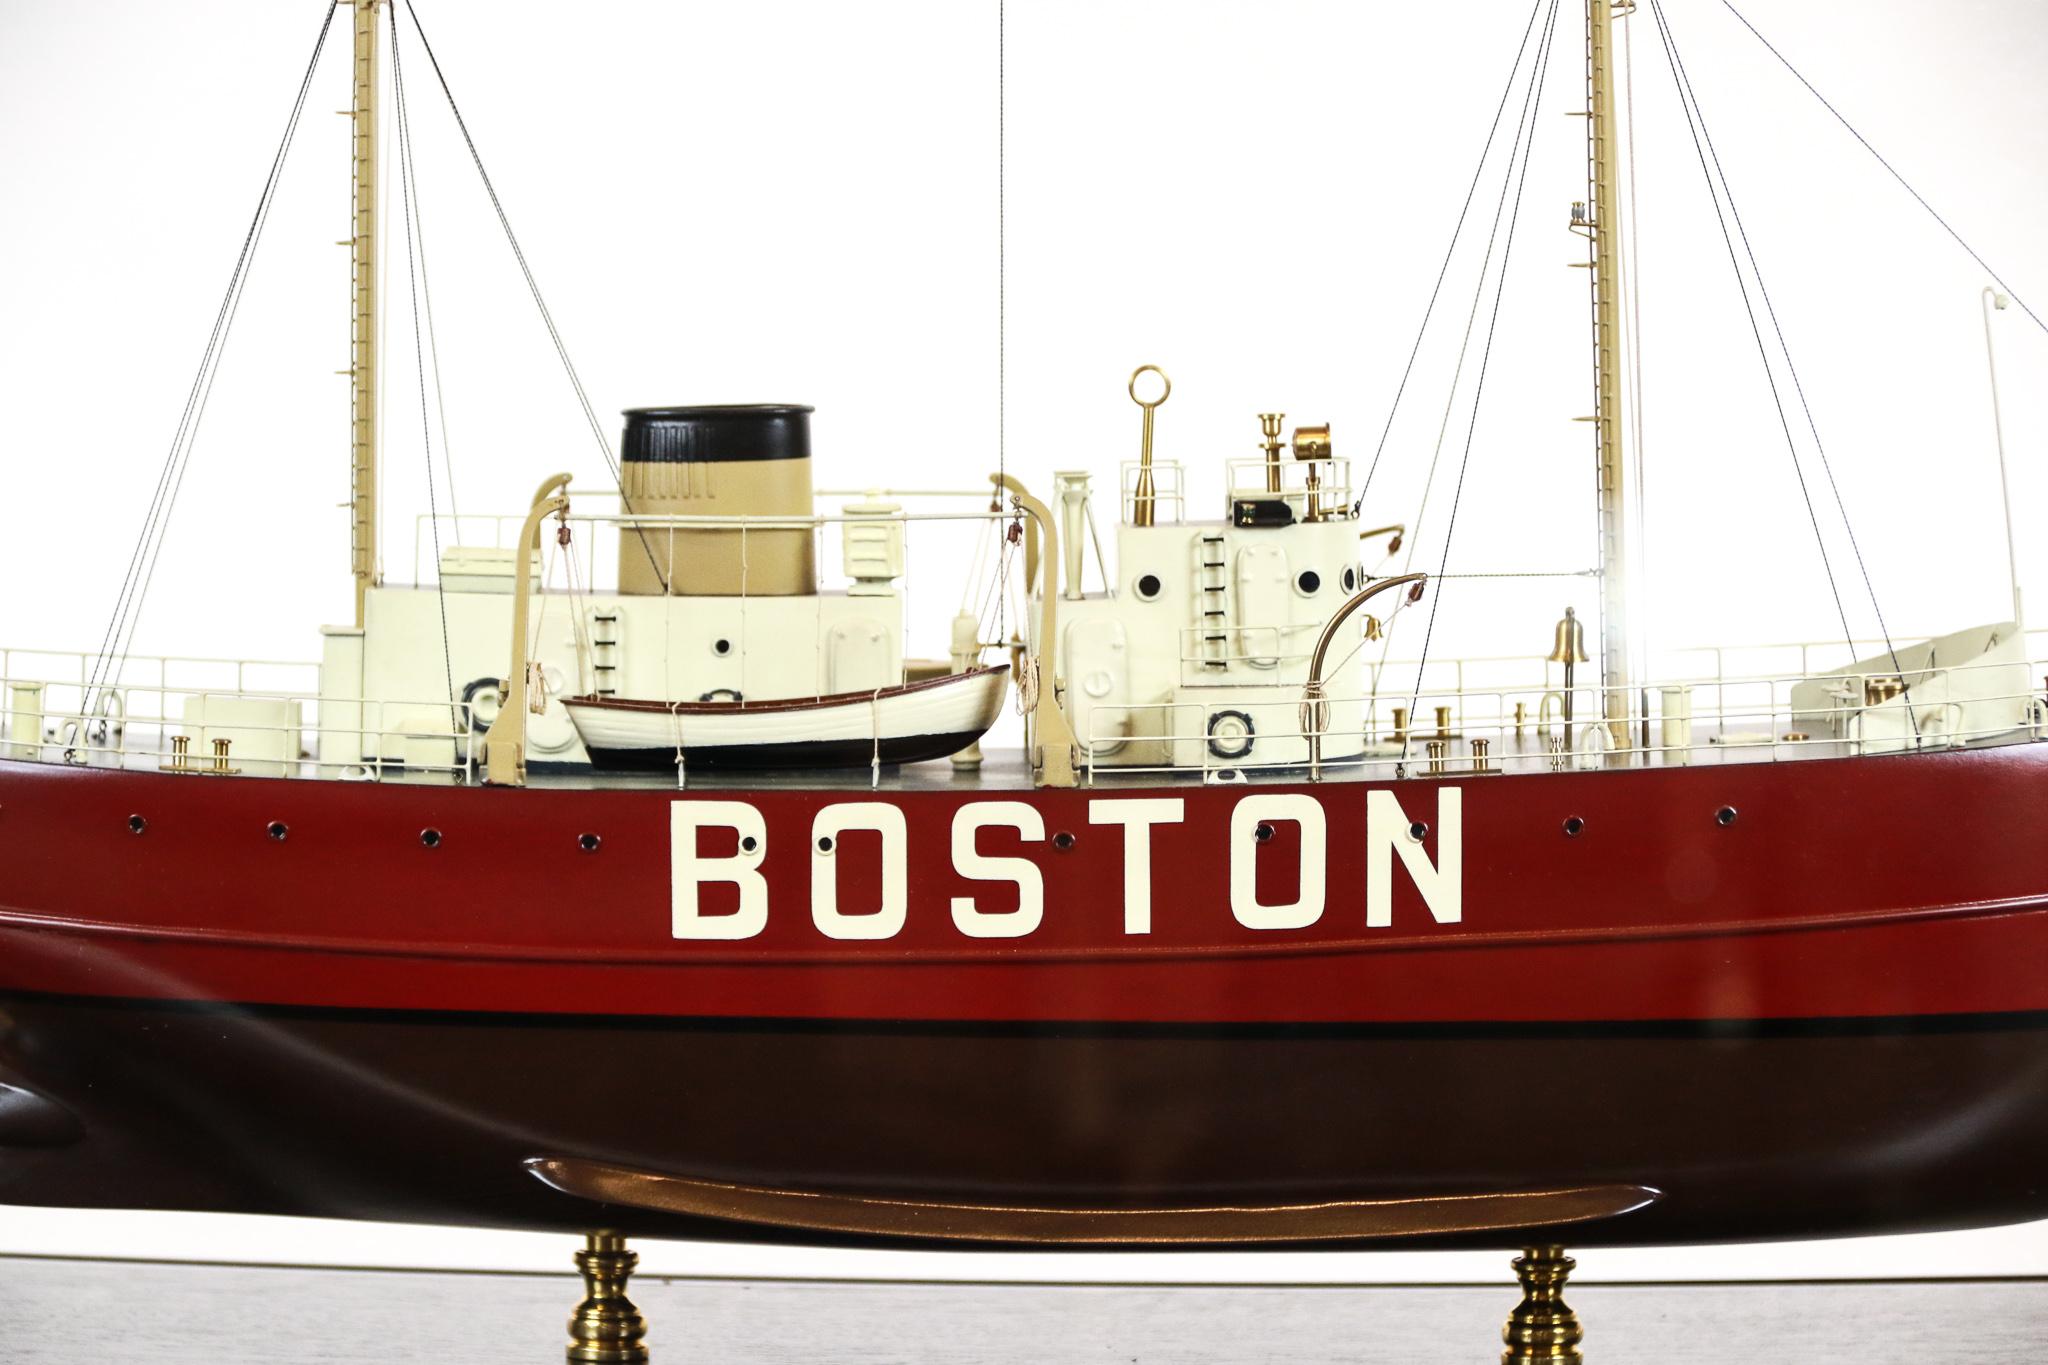 Coast guard lightship Boston model. A lightvessel, or lightship, is a ship that acts as a lighthouse. They are used in waters that are too deep or otherwise unsuitable for lighthouse construction. 

Measures: 33